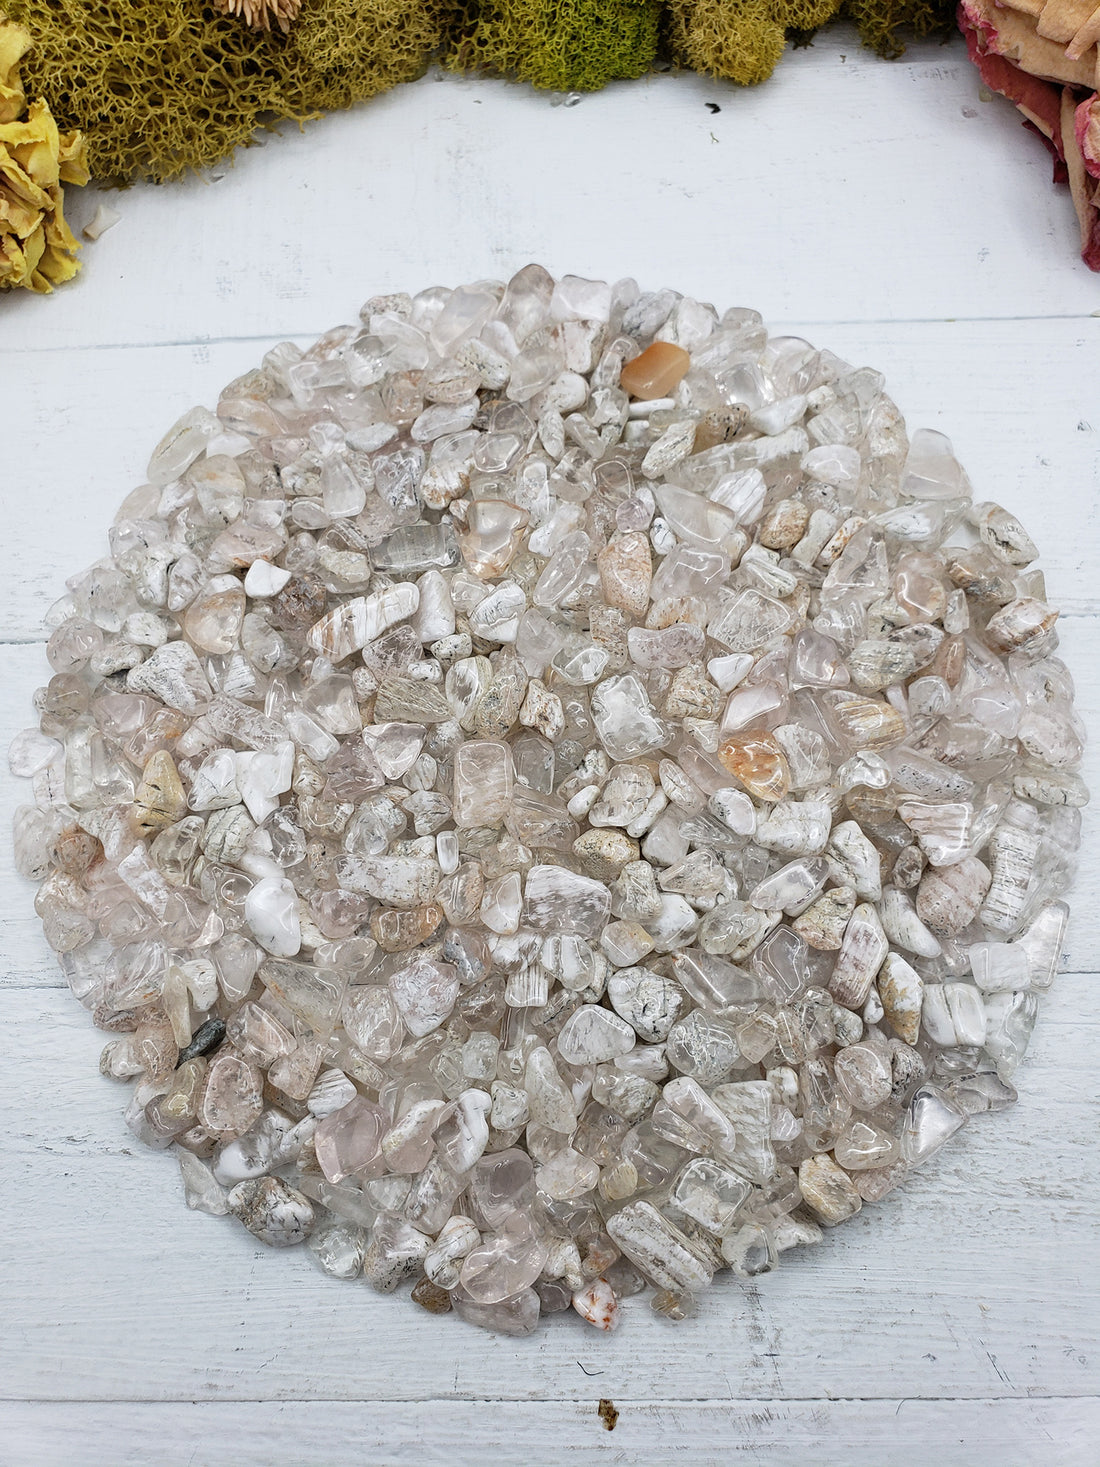 8 ounces of lodolite chips on display